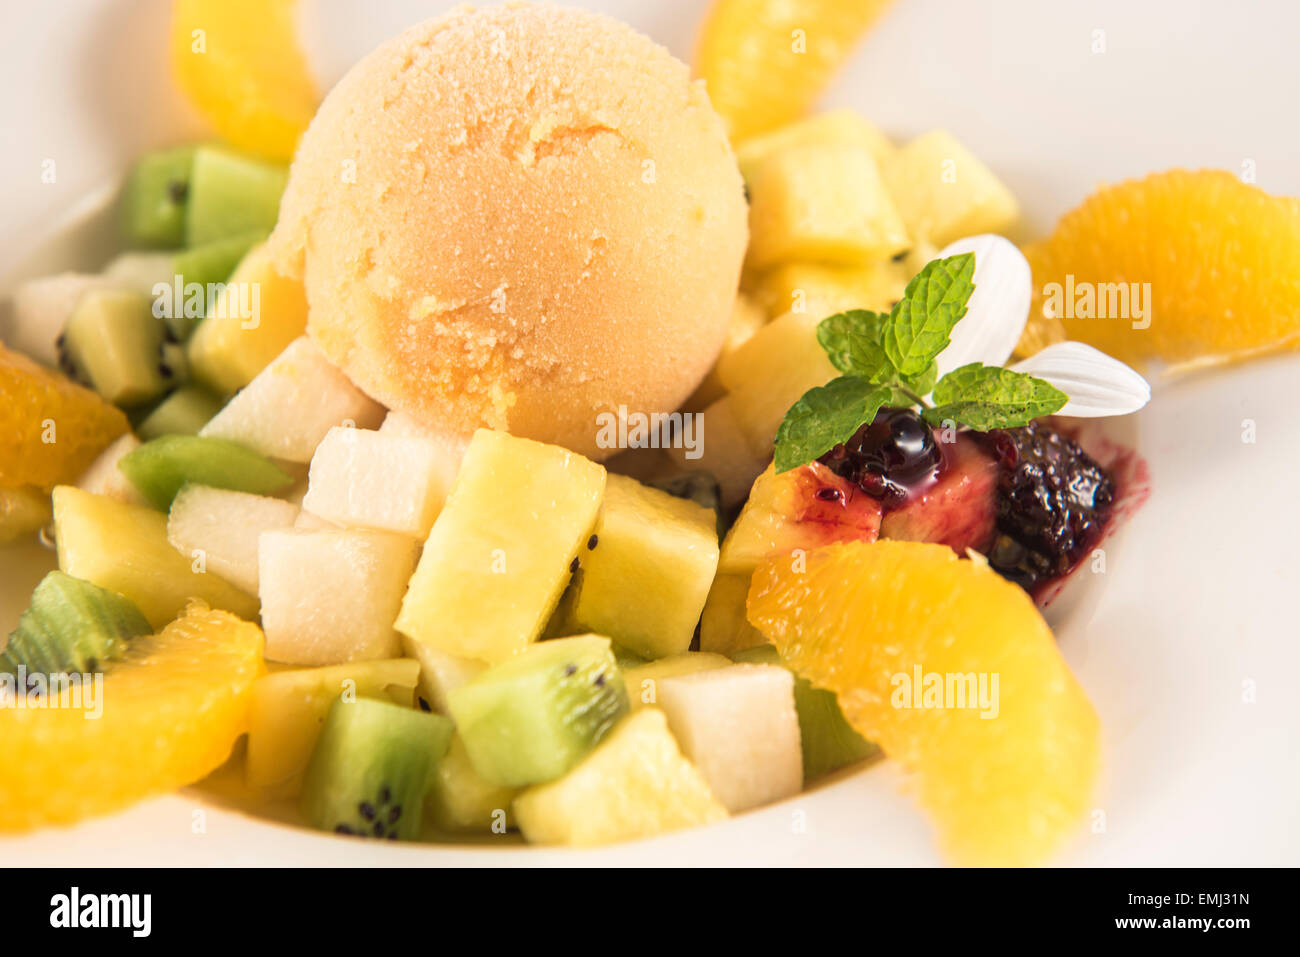 Salad plate with different kinds of fruit andicecream Stock Photo